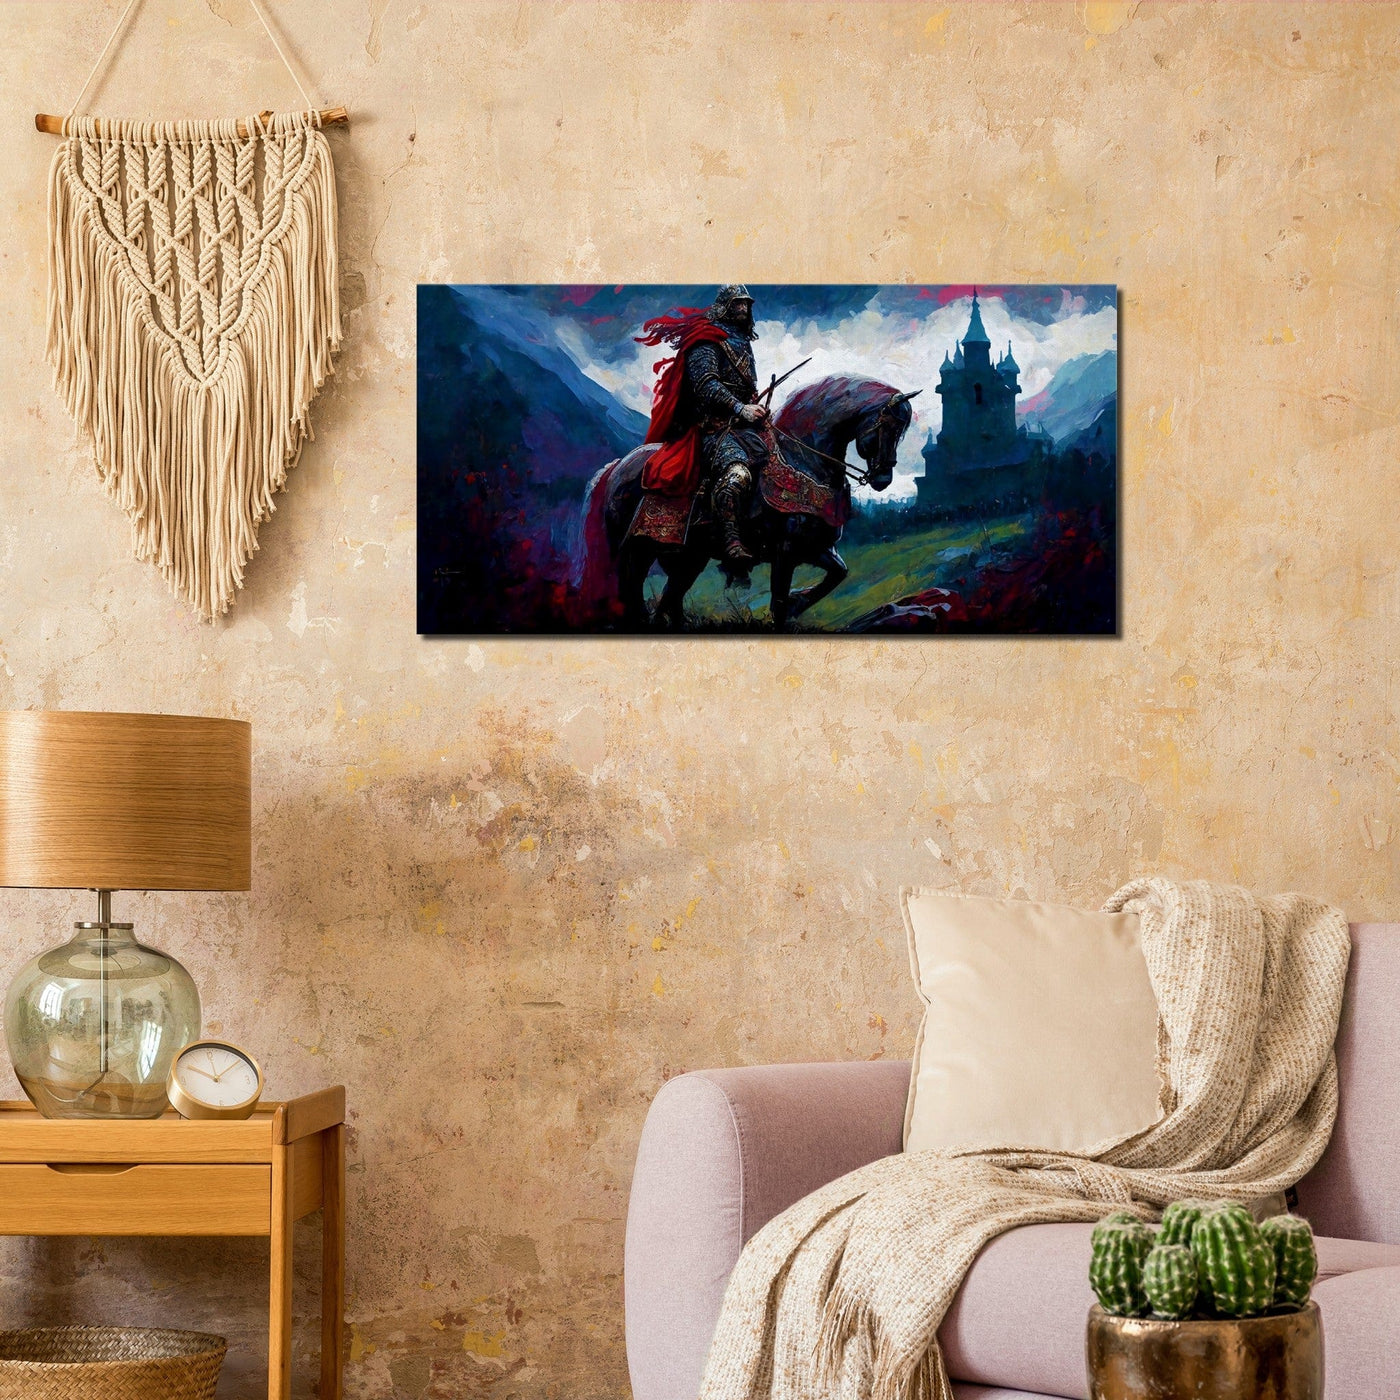 The King of Camelot - Oil Painting Printed Canvas. 50X100.